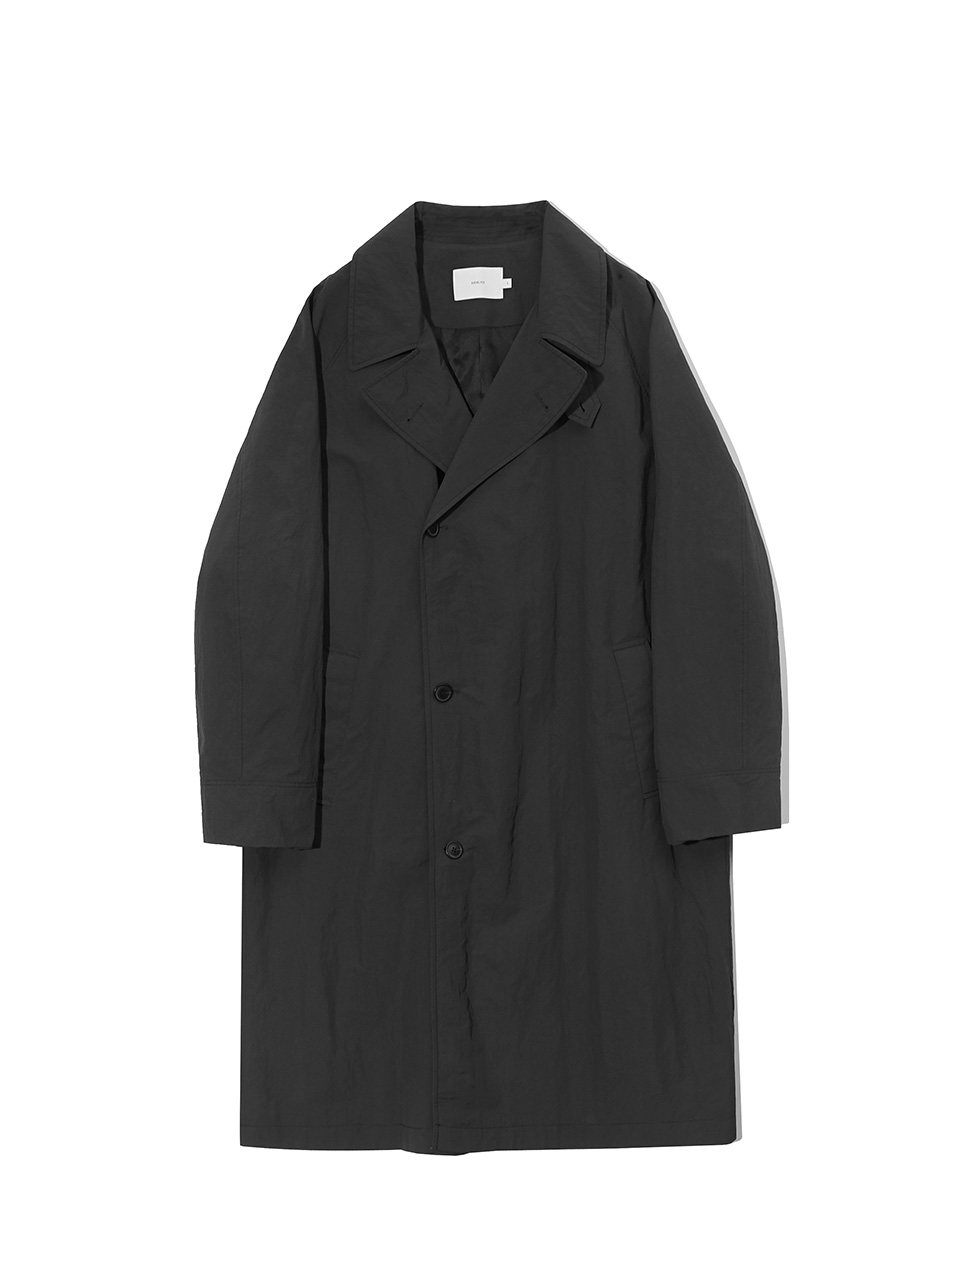 [Ourselves] RECYCLE NYLON DOUBLE BREASTED COAT (Charcoal)